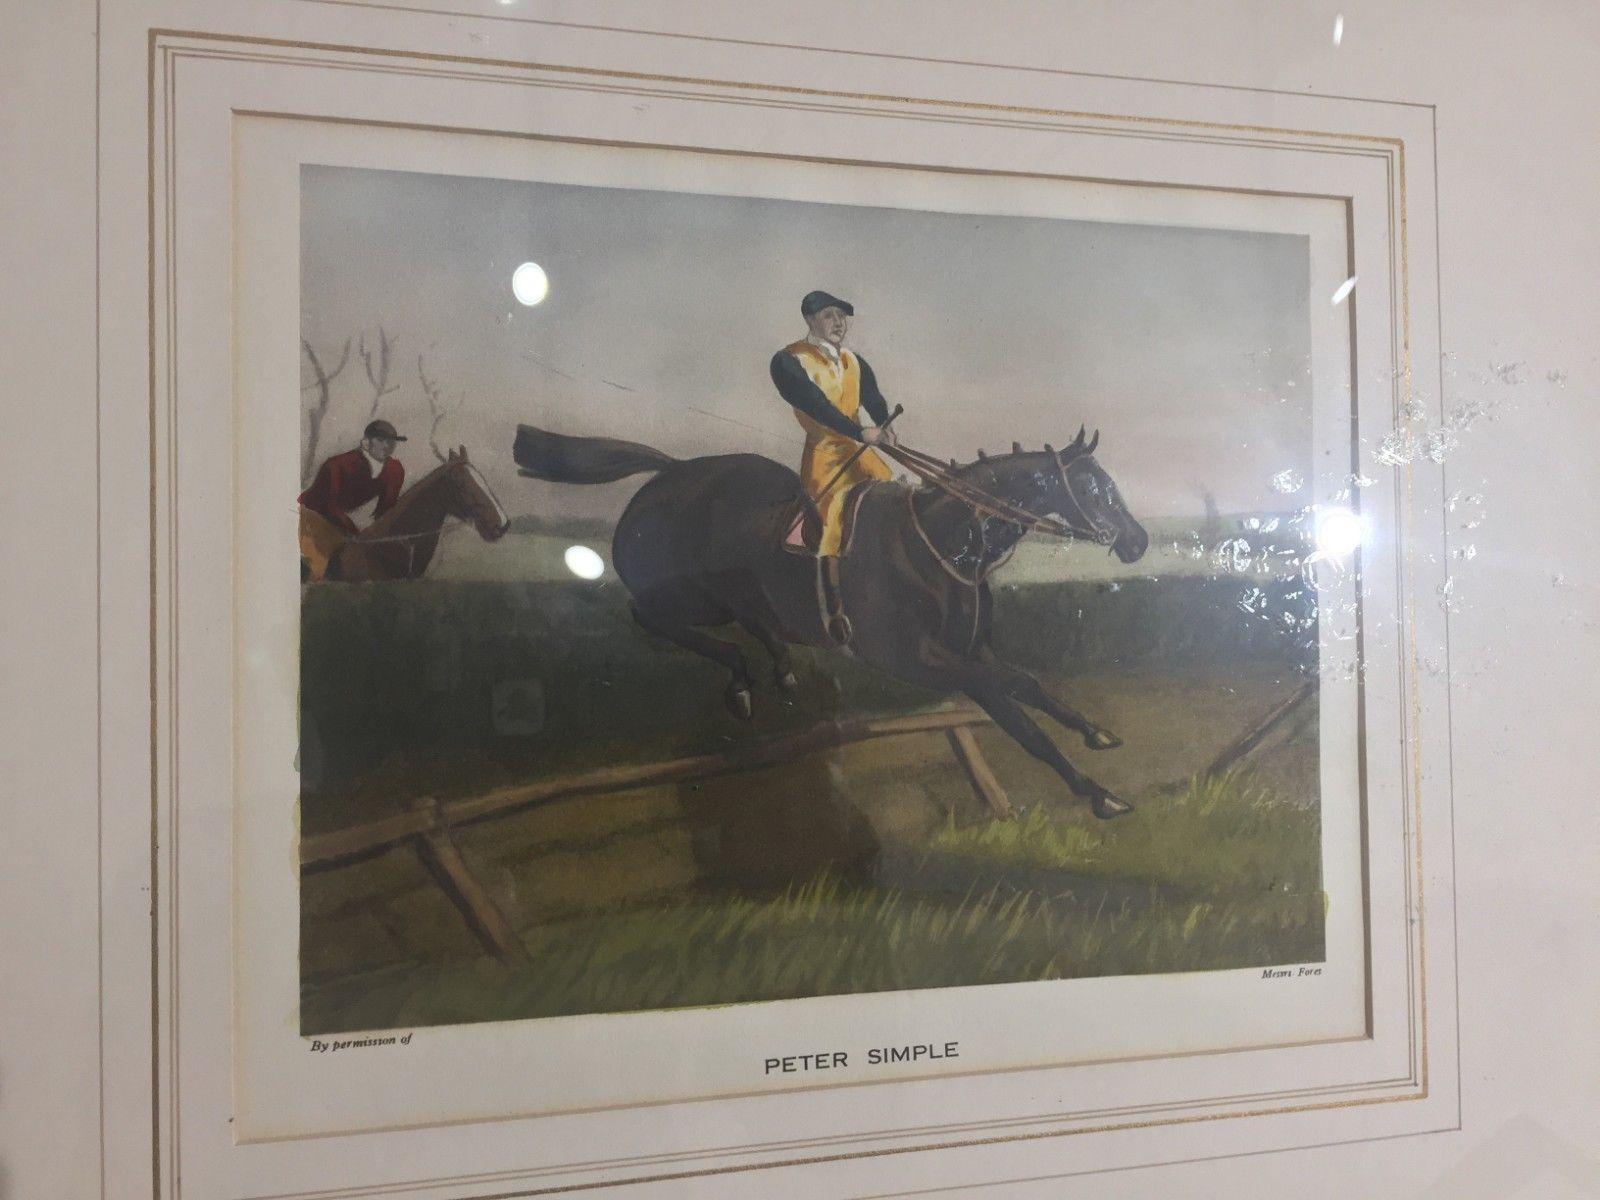 Late 19th century pair of English prints horse riding walnut frame.

Alfred Charles Havell: painter of horses and figurative subjects; exhibited at the Royal Academy. Born 1855 Chelsea; married Mary Marpole Lewis 1878; died 1928.